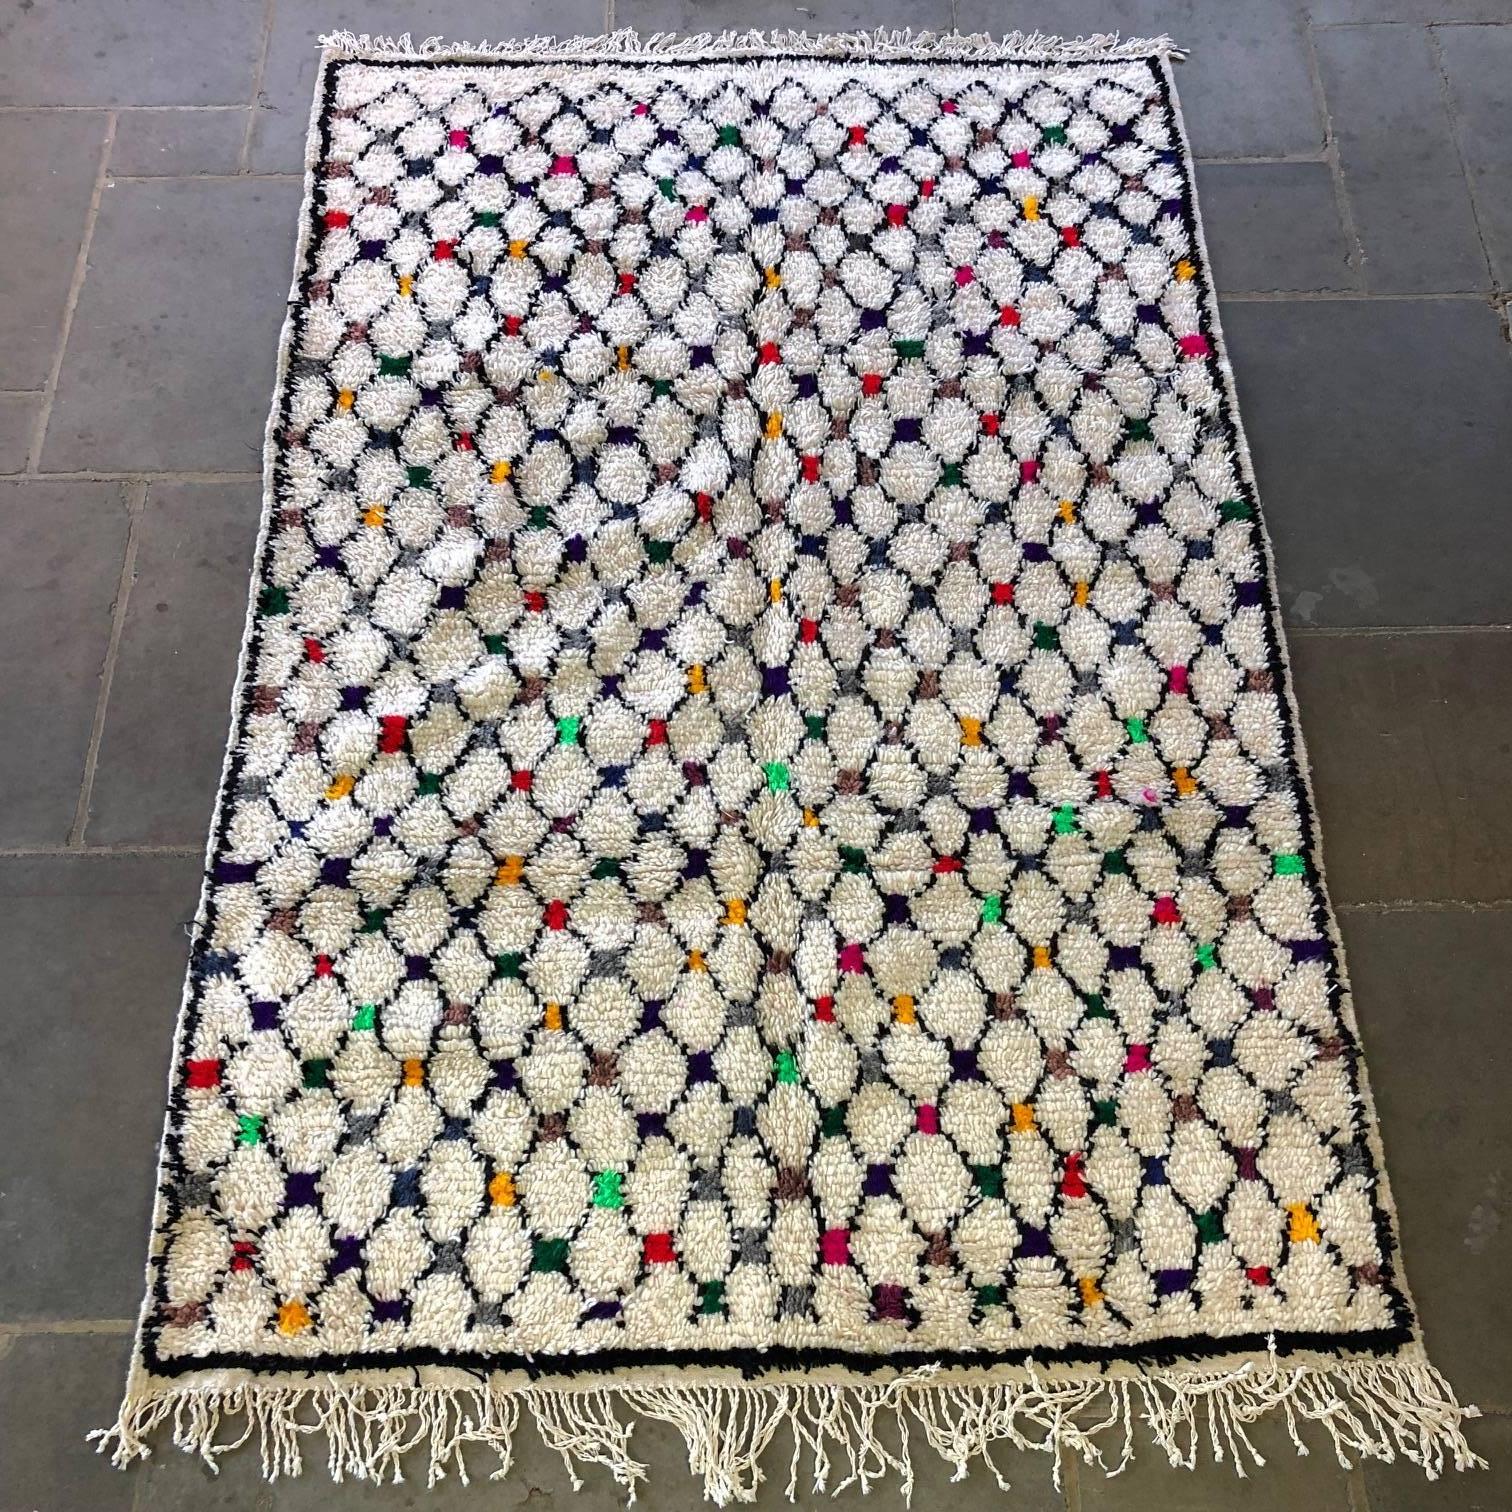 Beautiful Azilal rug from Morocco. Handcrafted from wool and cotton, no two of these are the same. Sourced from the villages of the Atlas Mountains, these rugs are vibrant and creative, an expression of modernism in folk art. They set off vintage